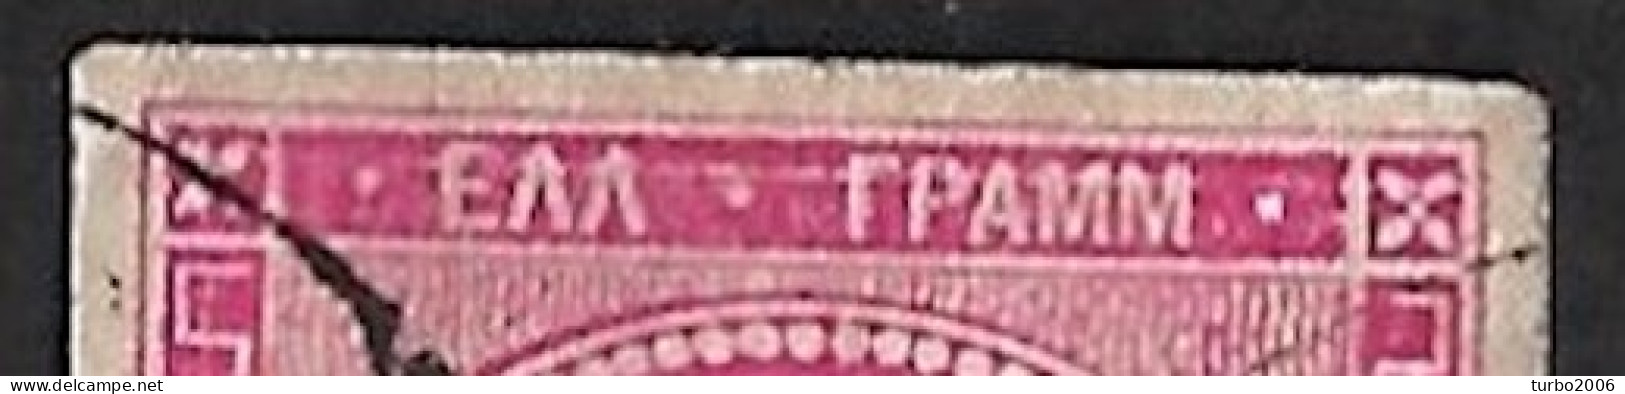 Plateflaw 20F6 (horizontal Line) In GREECE 1880-86 Large Hermes Head Athens Issue 20 L Aniline Red Vl. 72 A / H 59 II A - Gebruikt